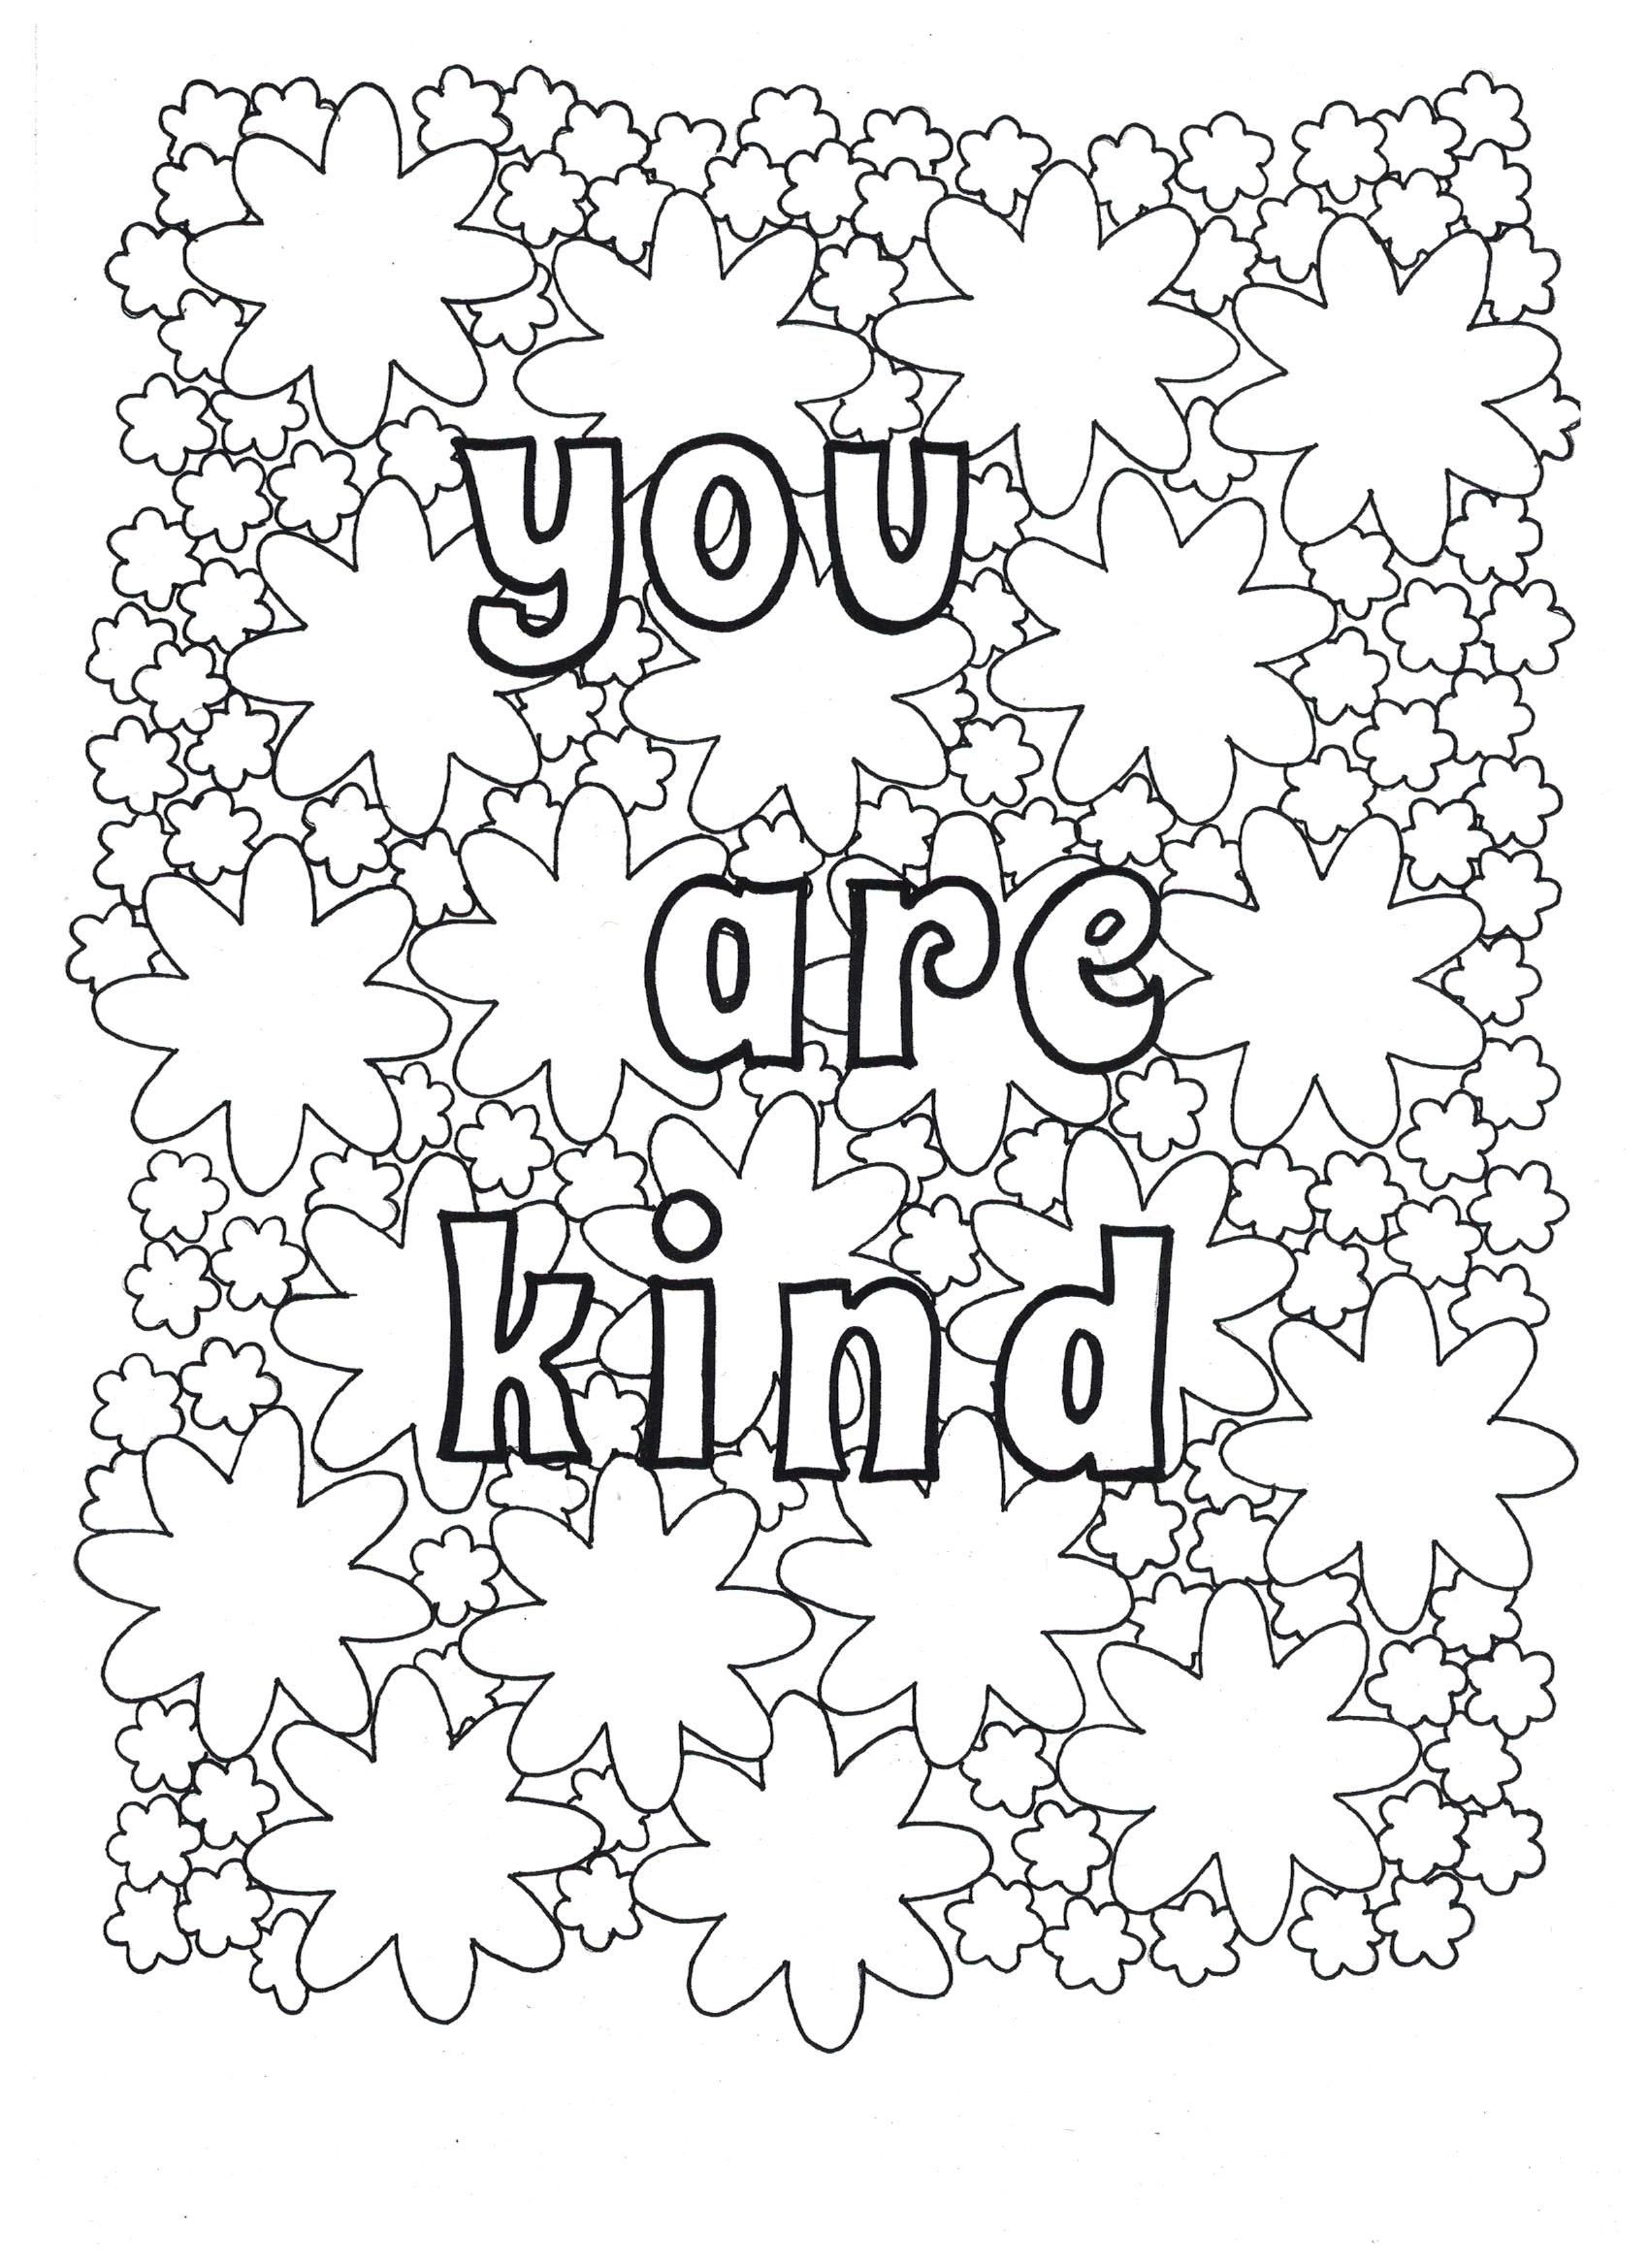 Kindness Coloring Pages